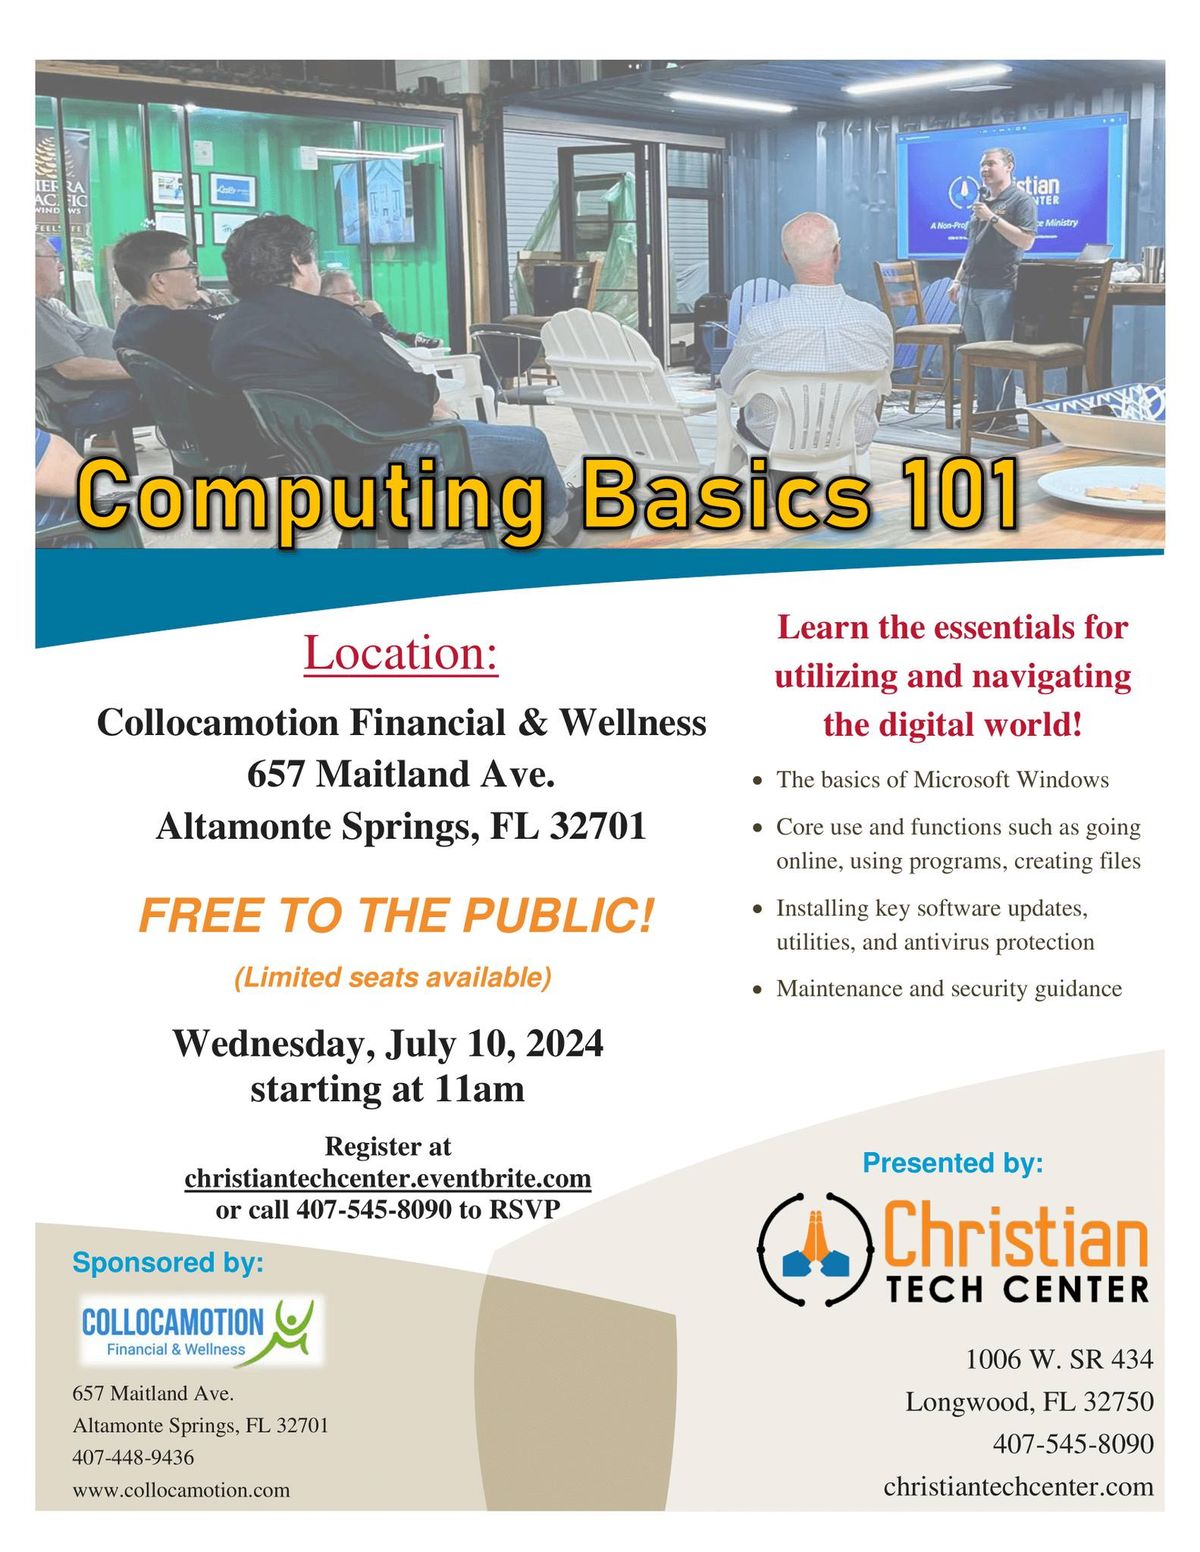 Computing Basics 101 Workshop sponsored by COLLOCAMOTION Financial & Wellness